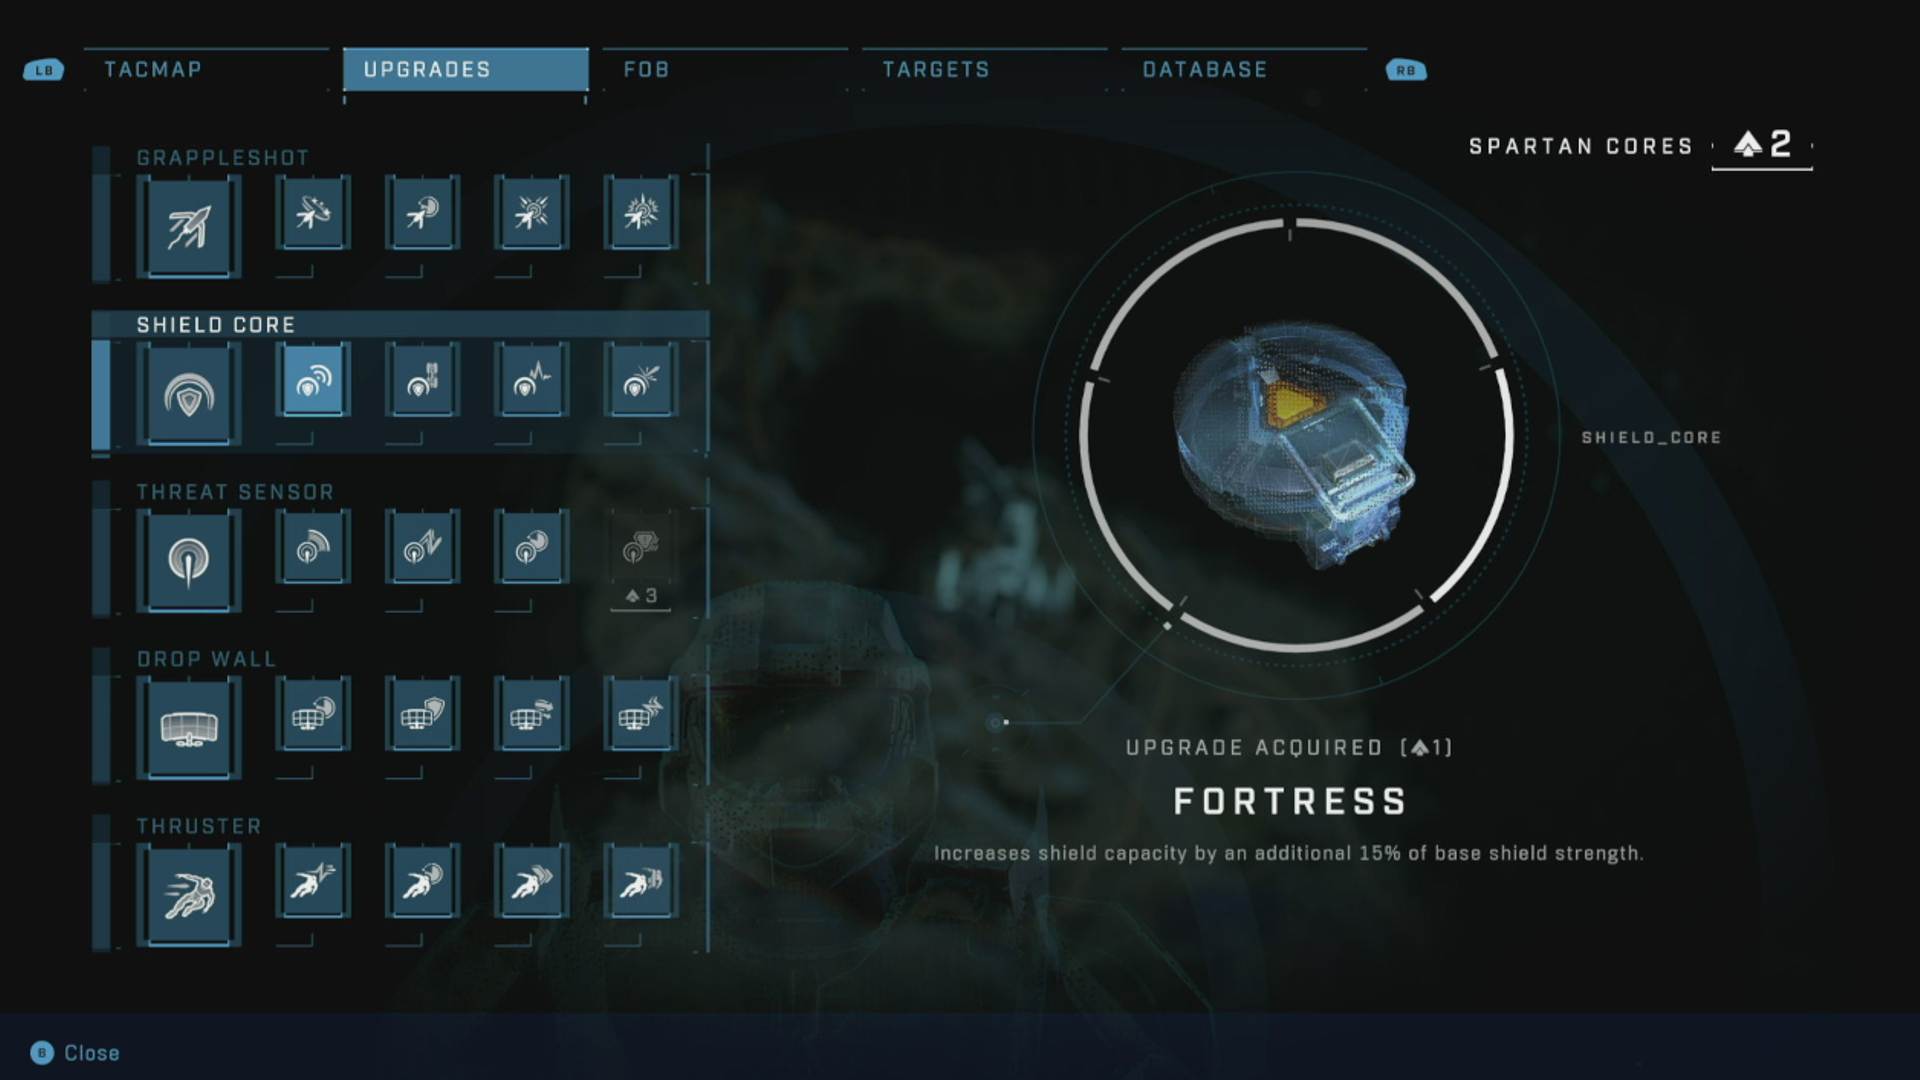 Halo Infinite Best Upgrades: The menu showing the Fortress upgrade.